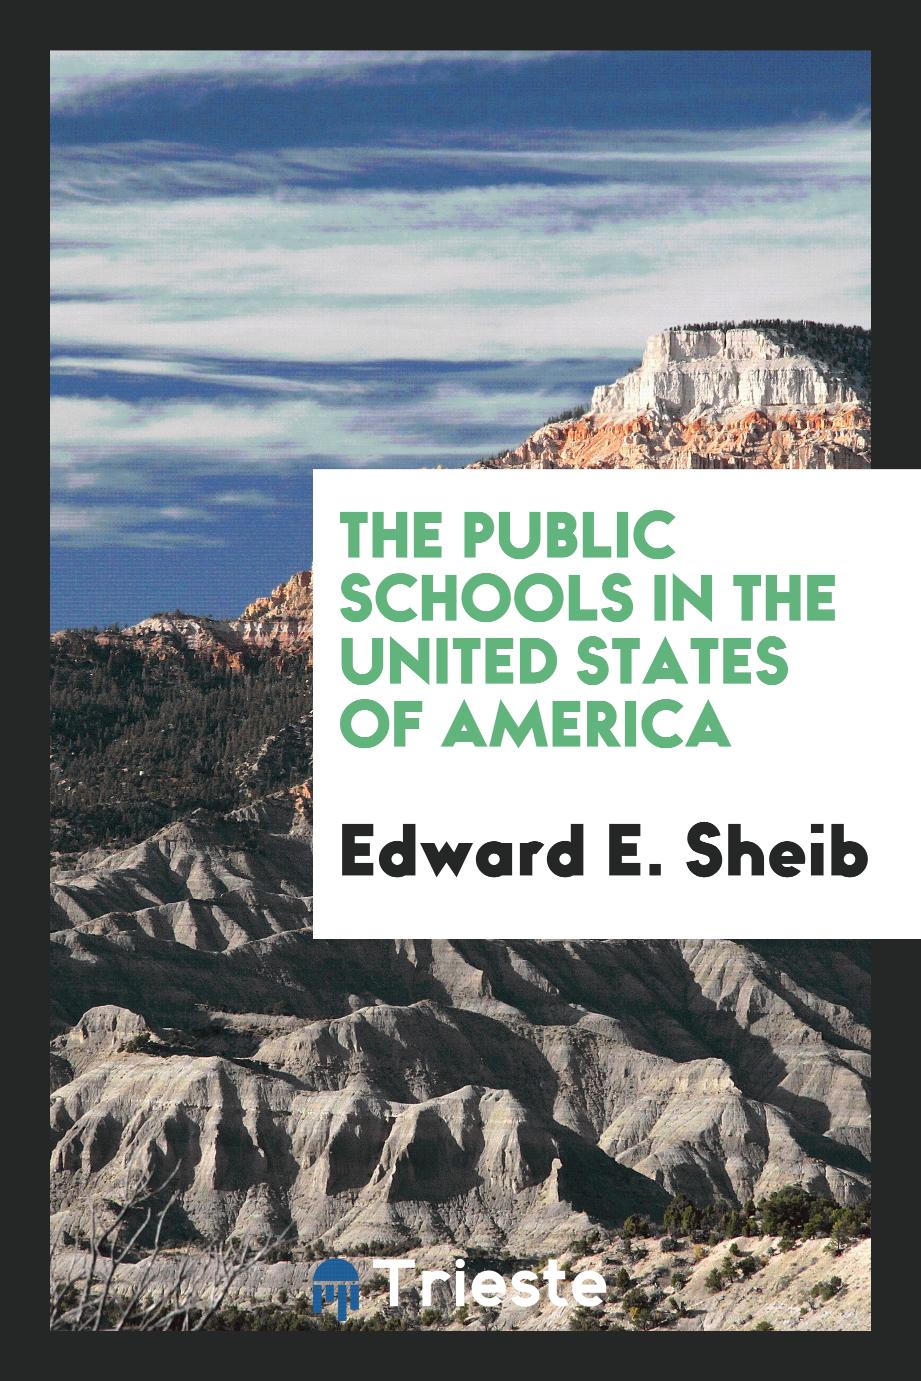 The Public Schools in the United States of America